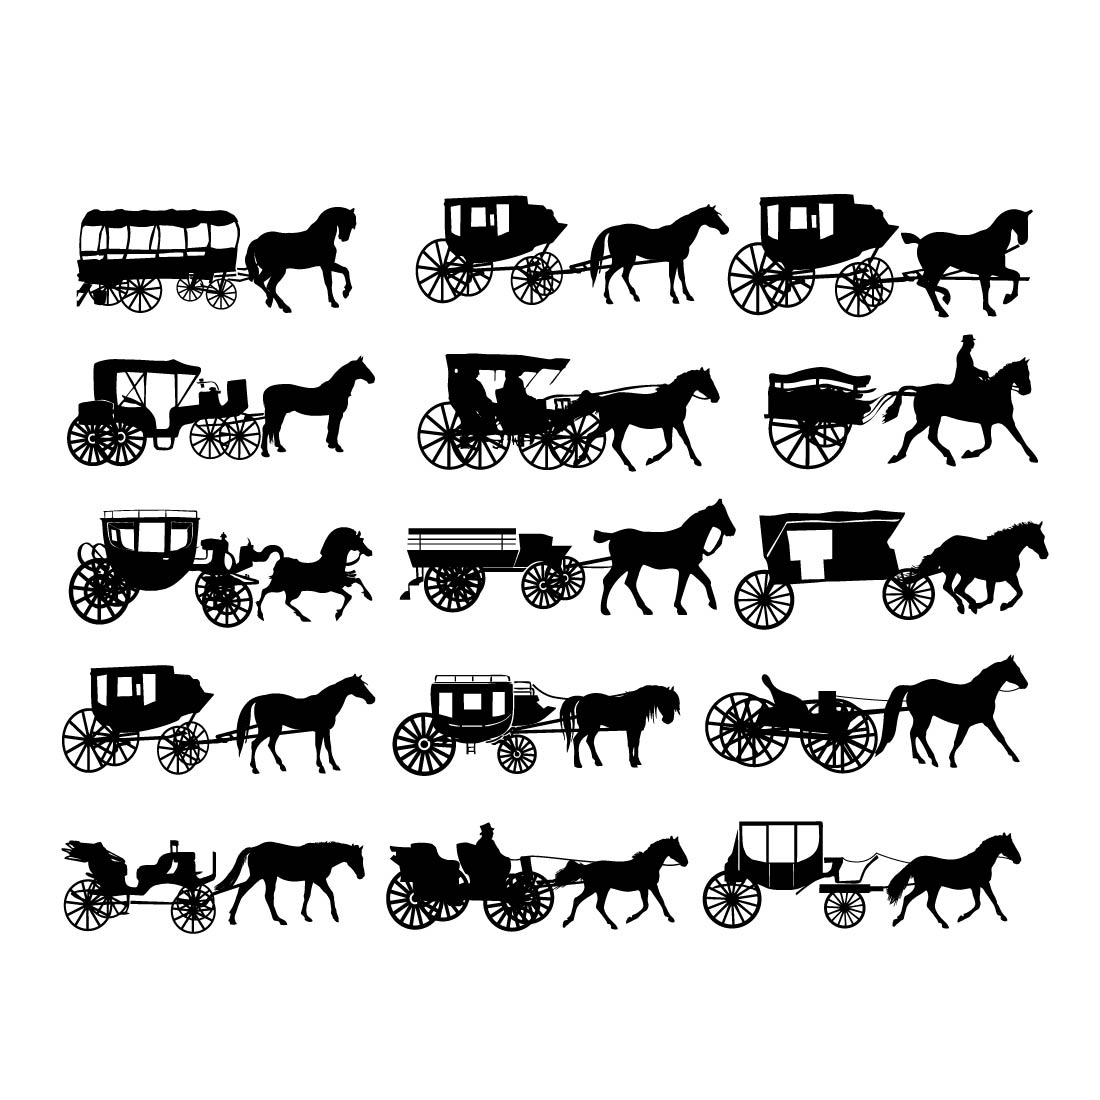 Horse Carriages Silhouettes,Carriage Silhouette svg,Disney Carriage svg Bundle,Carriage with horse svg bundle horse car svg preview image.